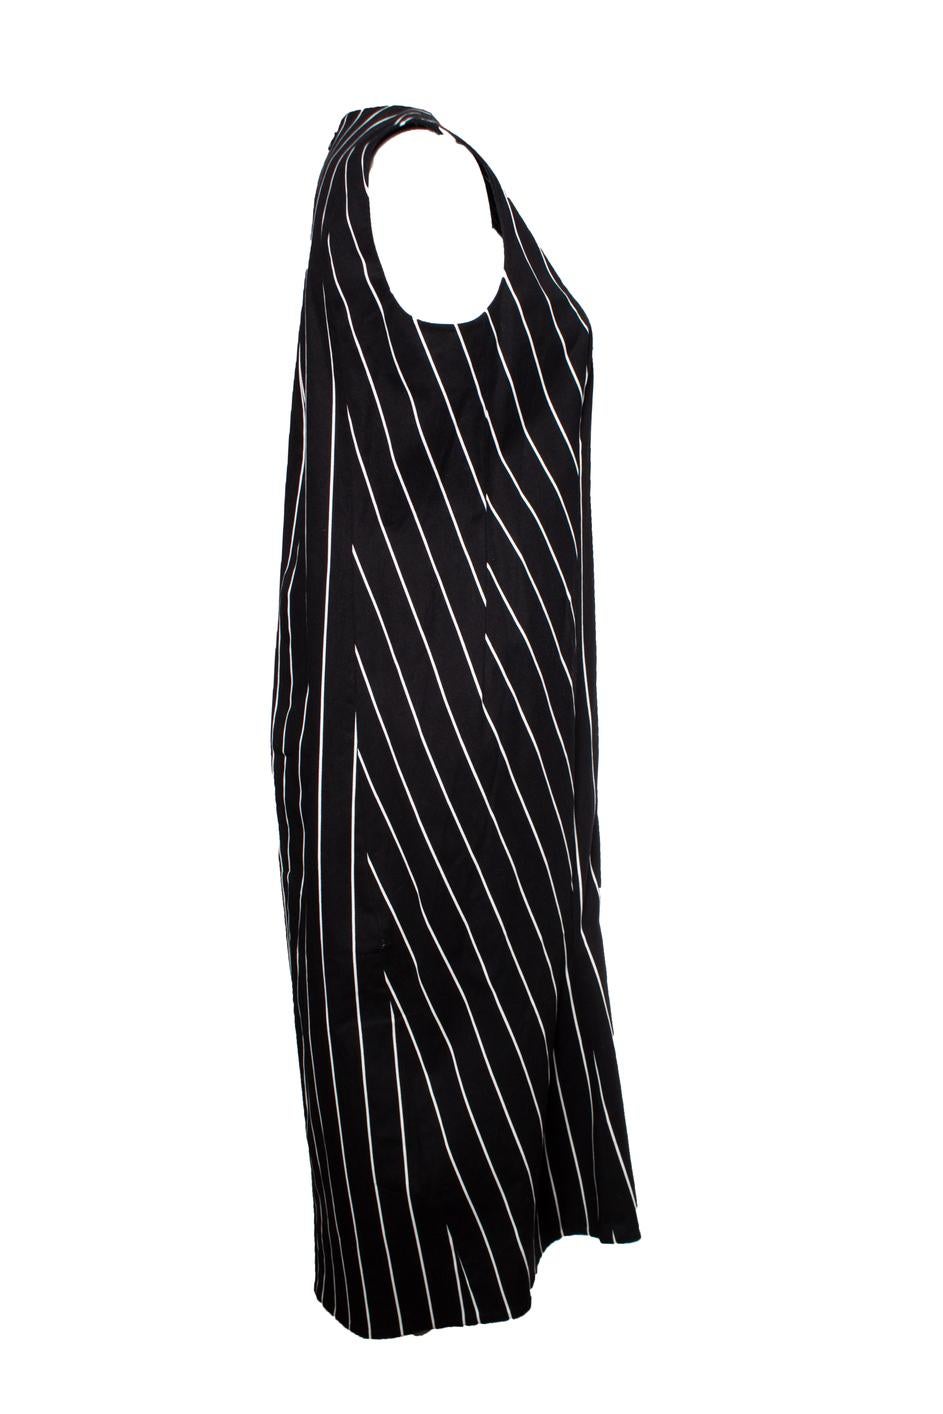 Balenciaga, Maxi dress with striped print In Excellent Condition For Sale In AMSTERDAM, NL